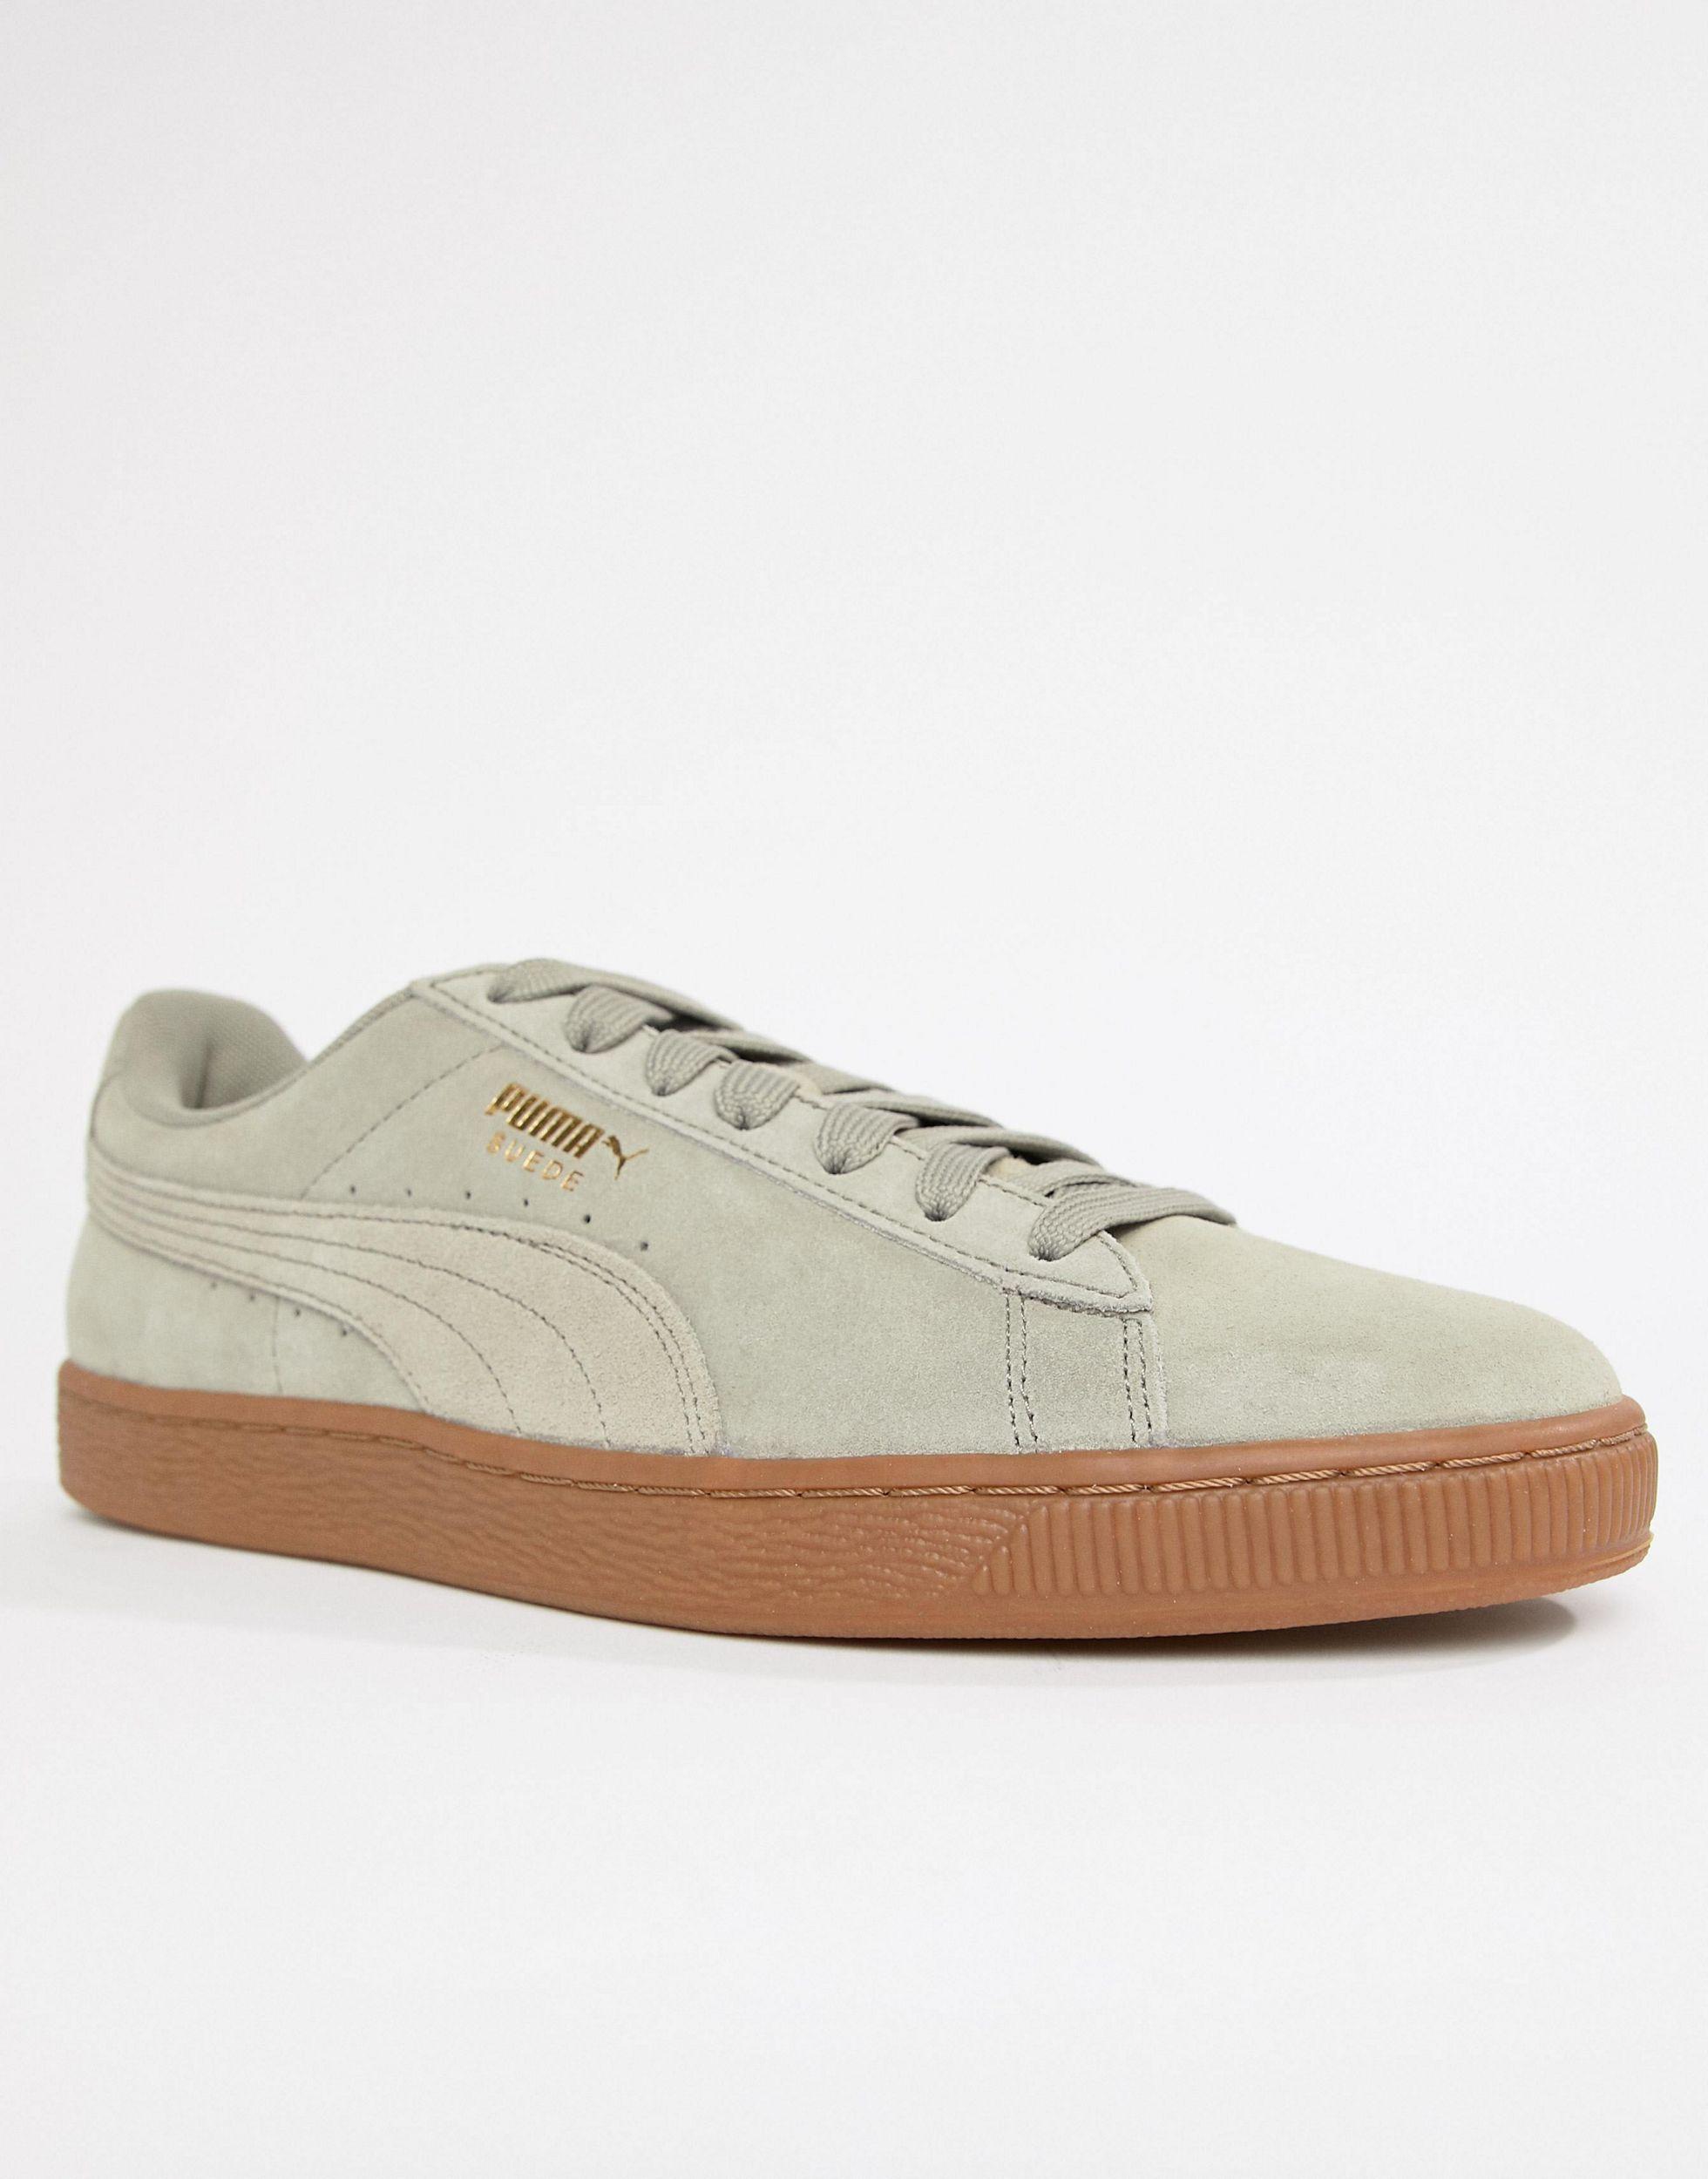 PUMA Suede Gum Sole Trainers In Grey 36534747 in Gray for Men - Lyst